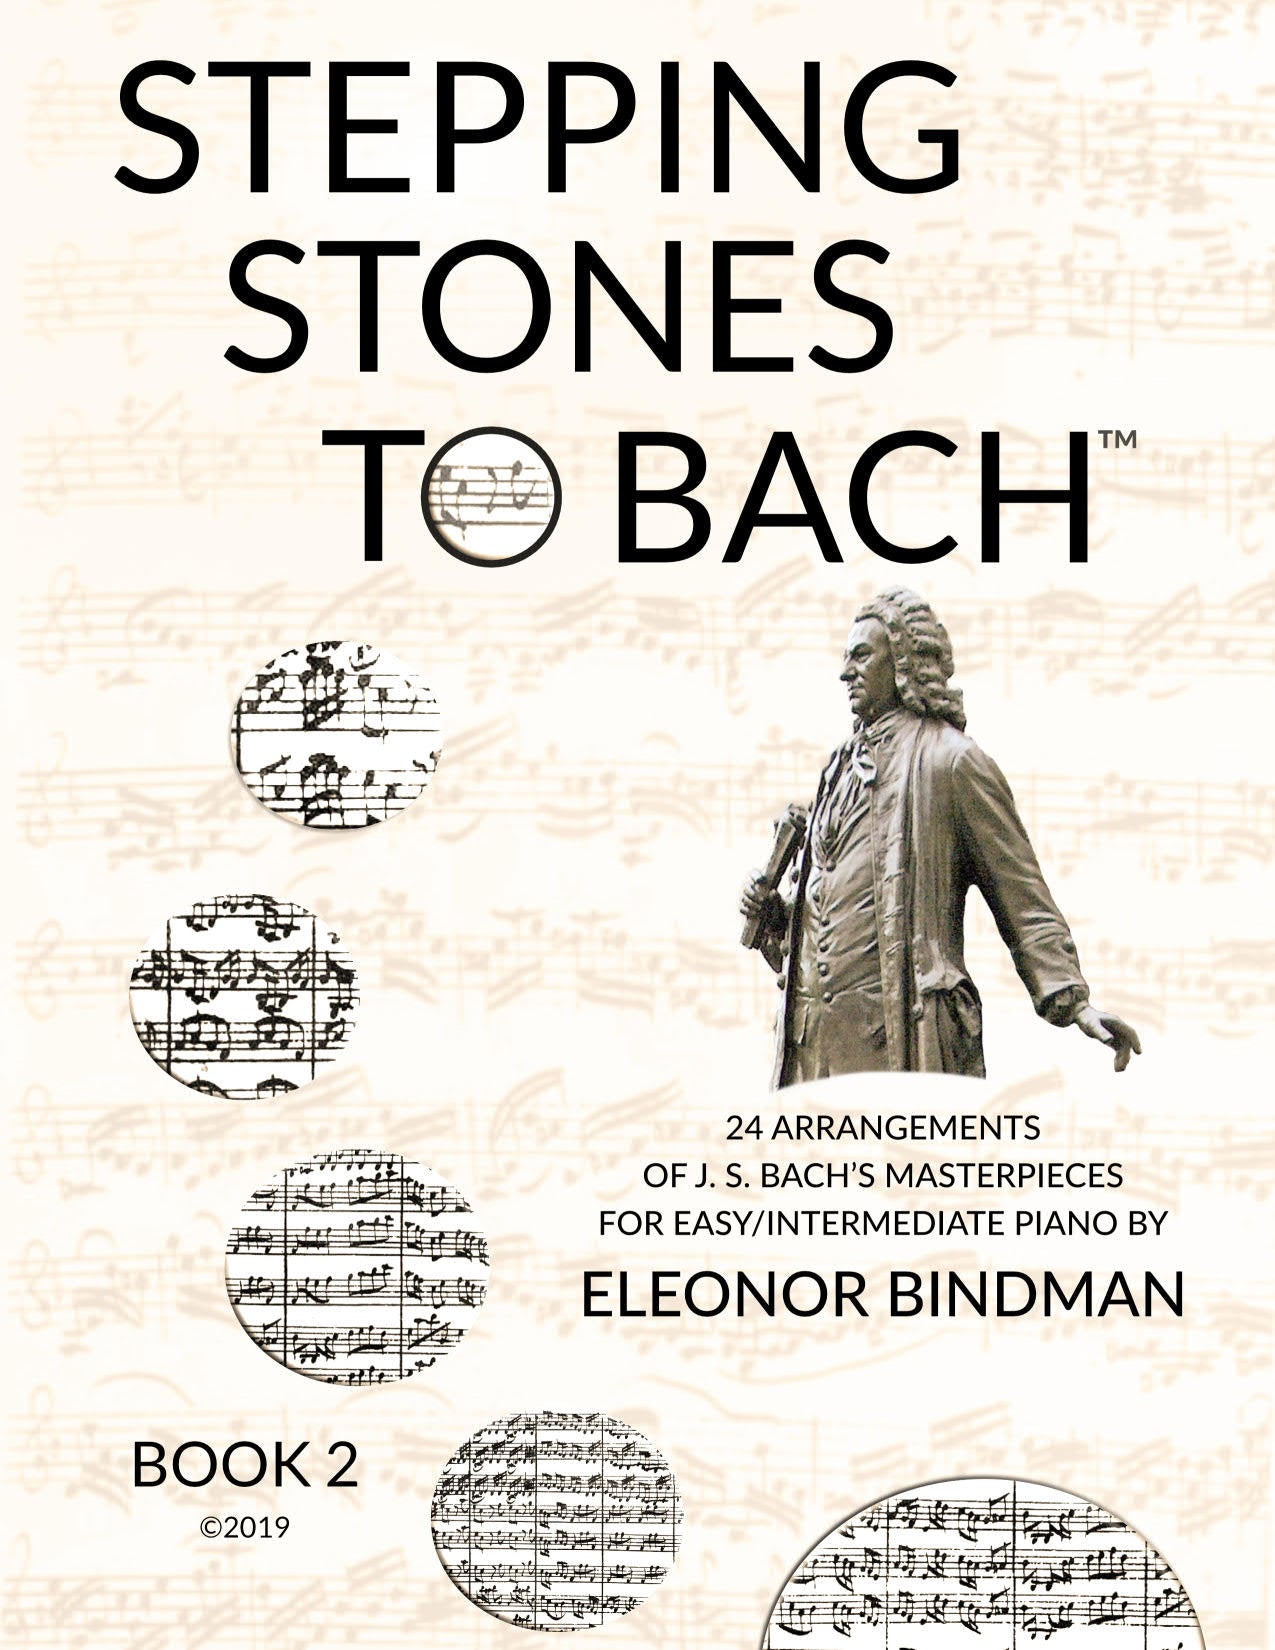 Stepping Stones to Bach (Book 2). 24 Arrangements of J.S. Bach's masterpieces for easy/intermediate piano by Eleonor Bindman (GPC044)